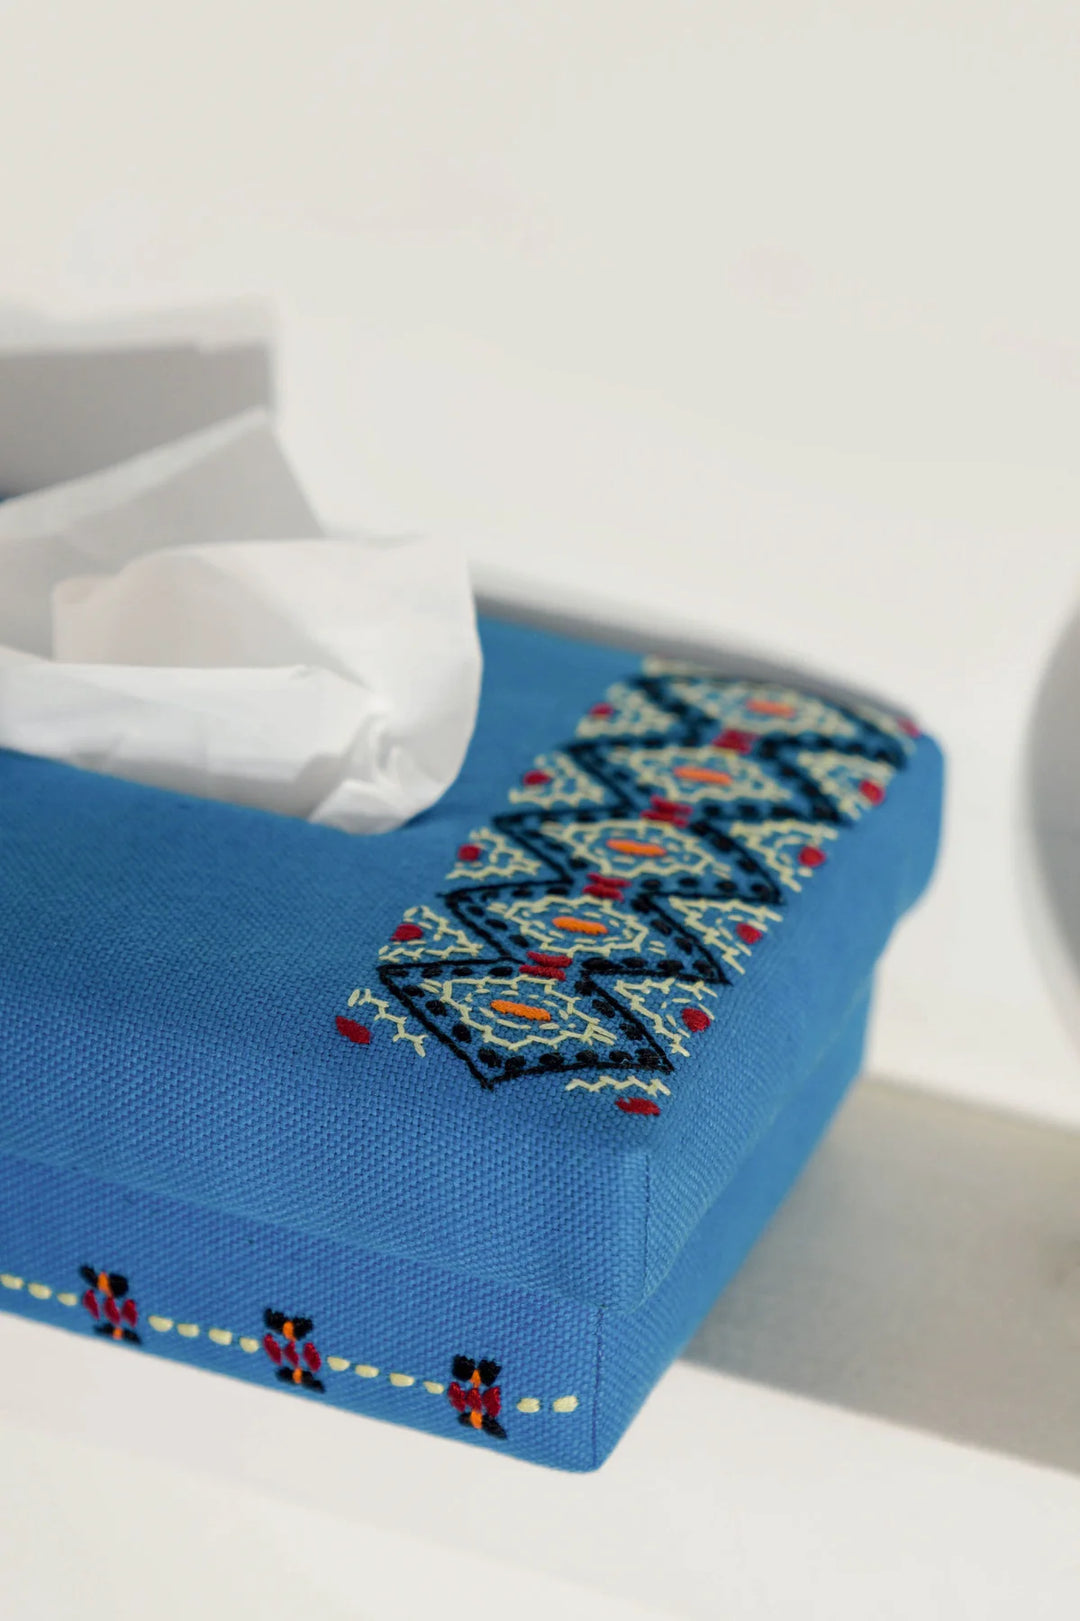 Blue Handwoven Cotton Tissue Box with Embroidery | Alba Handwoven Tissue Box - Blue